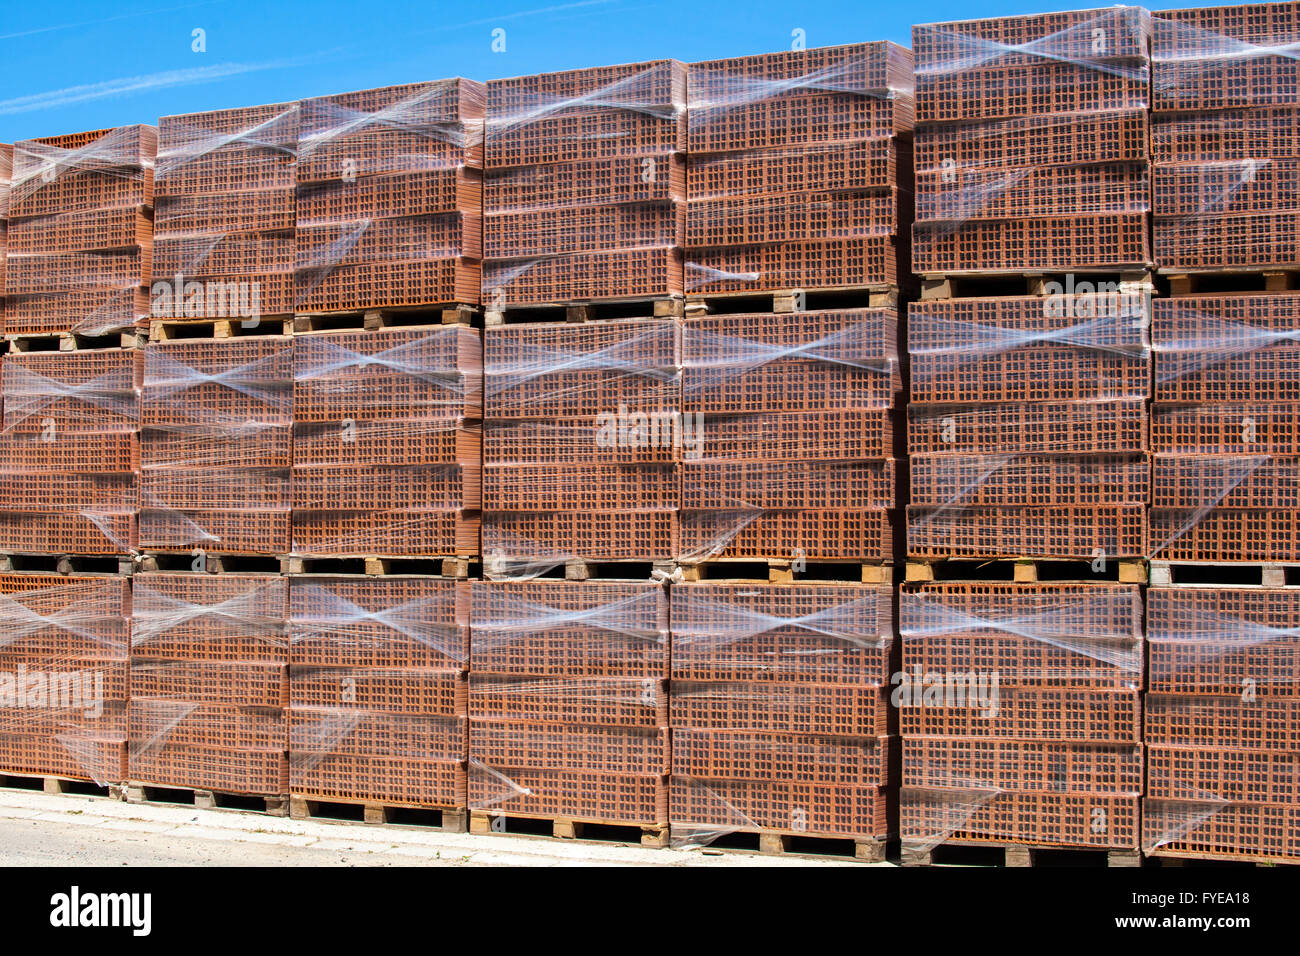 Many new bricks on stacked and foiled pallets, ready for transport and use. Stock Photo